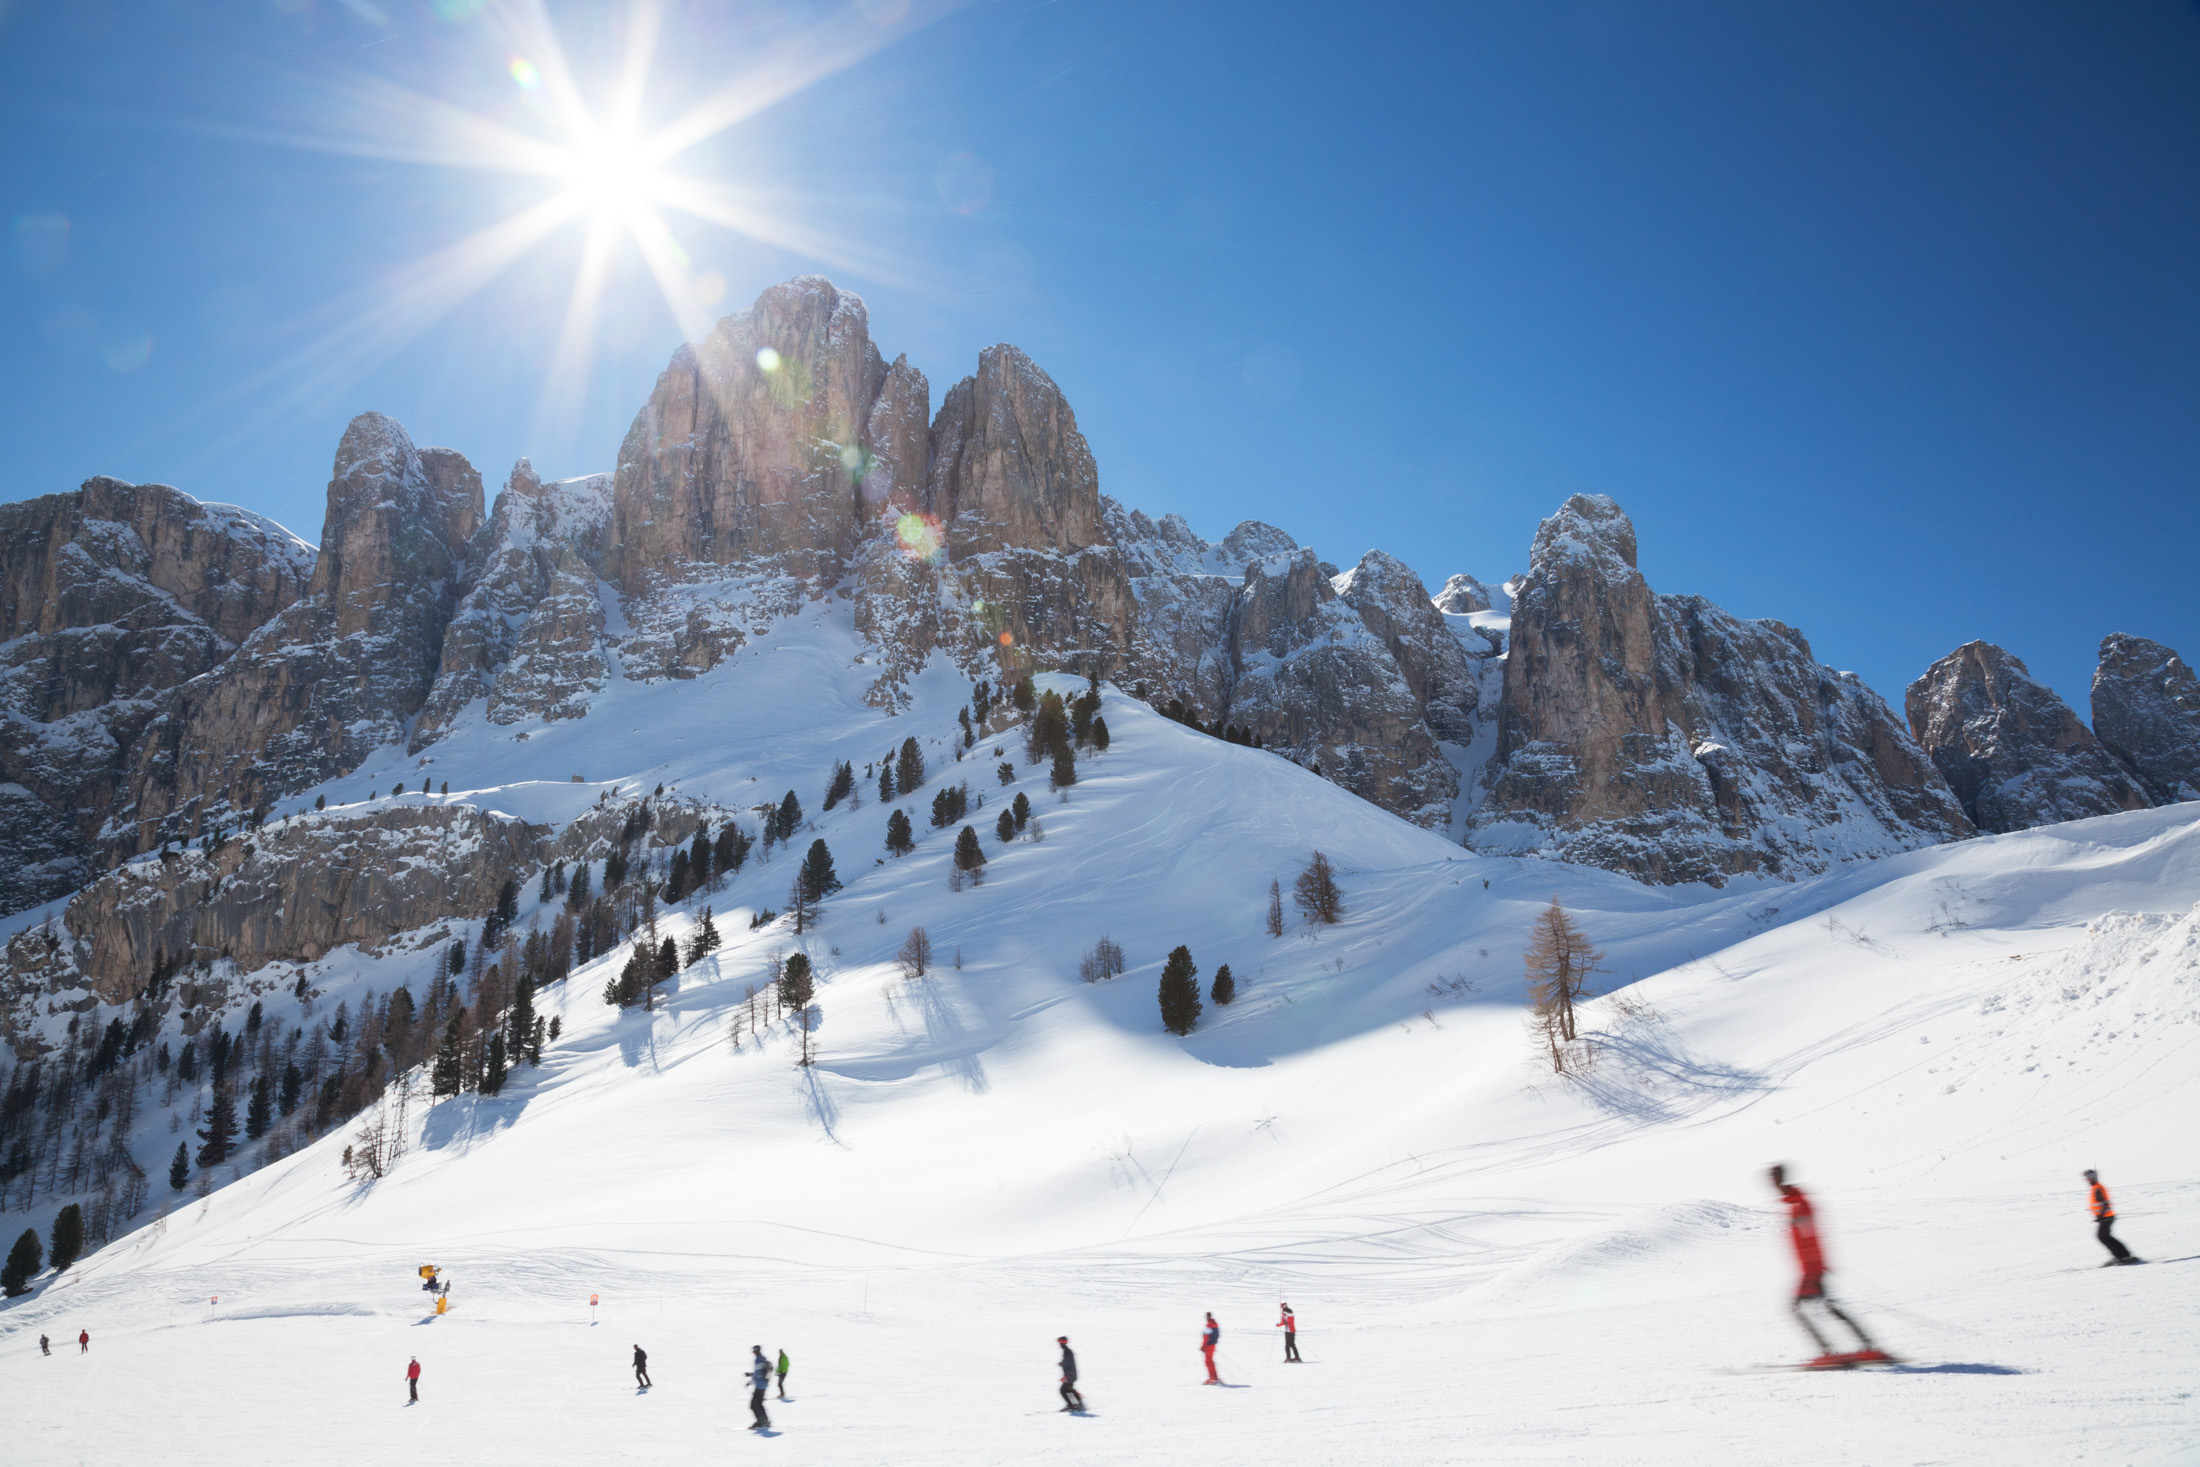 Top 5 best ski resorts in Europe for buying a second home